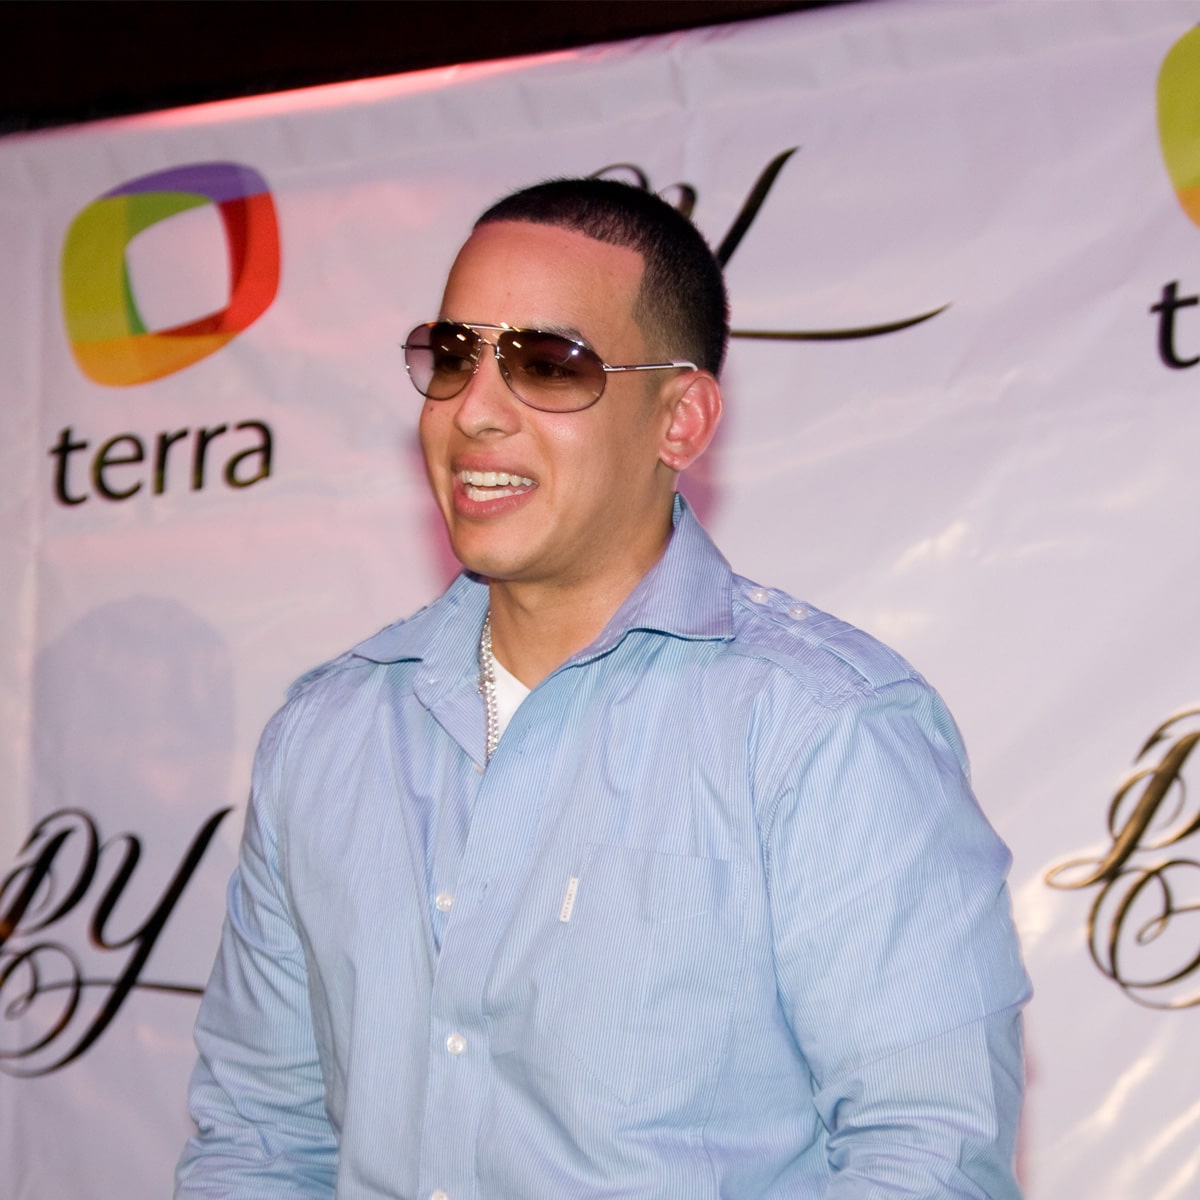 daddy yankee attends press conference about his album and new site